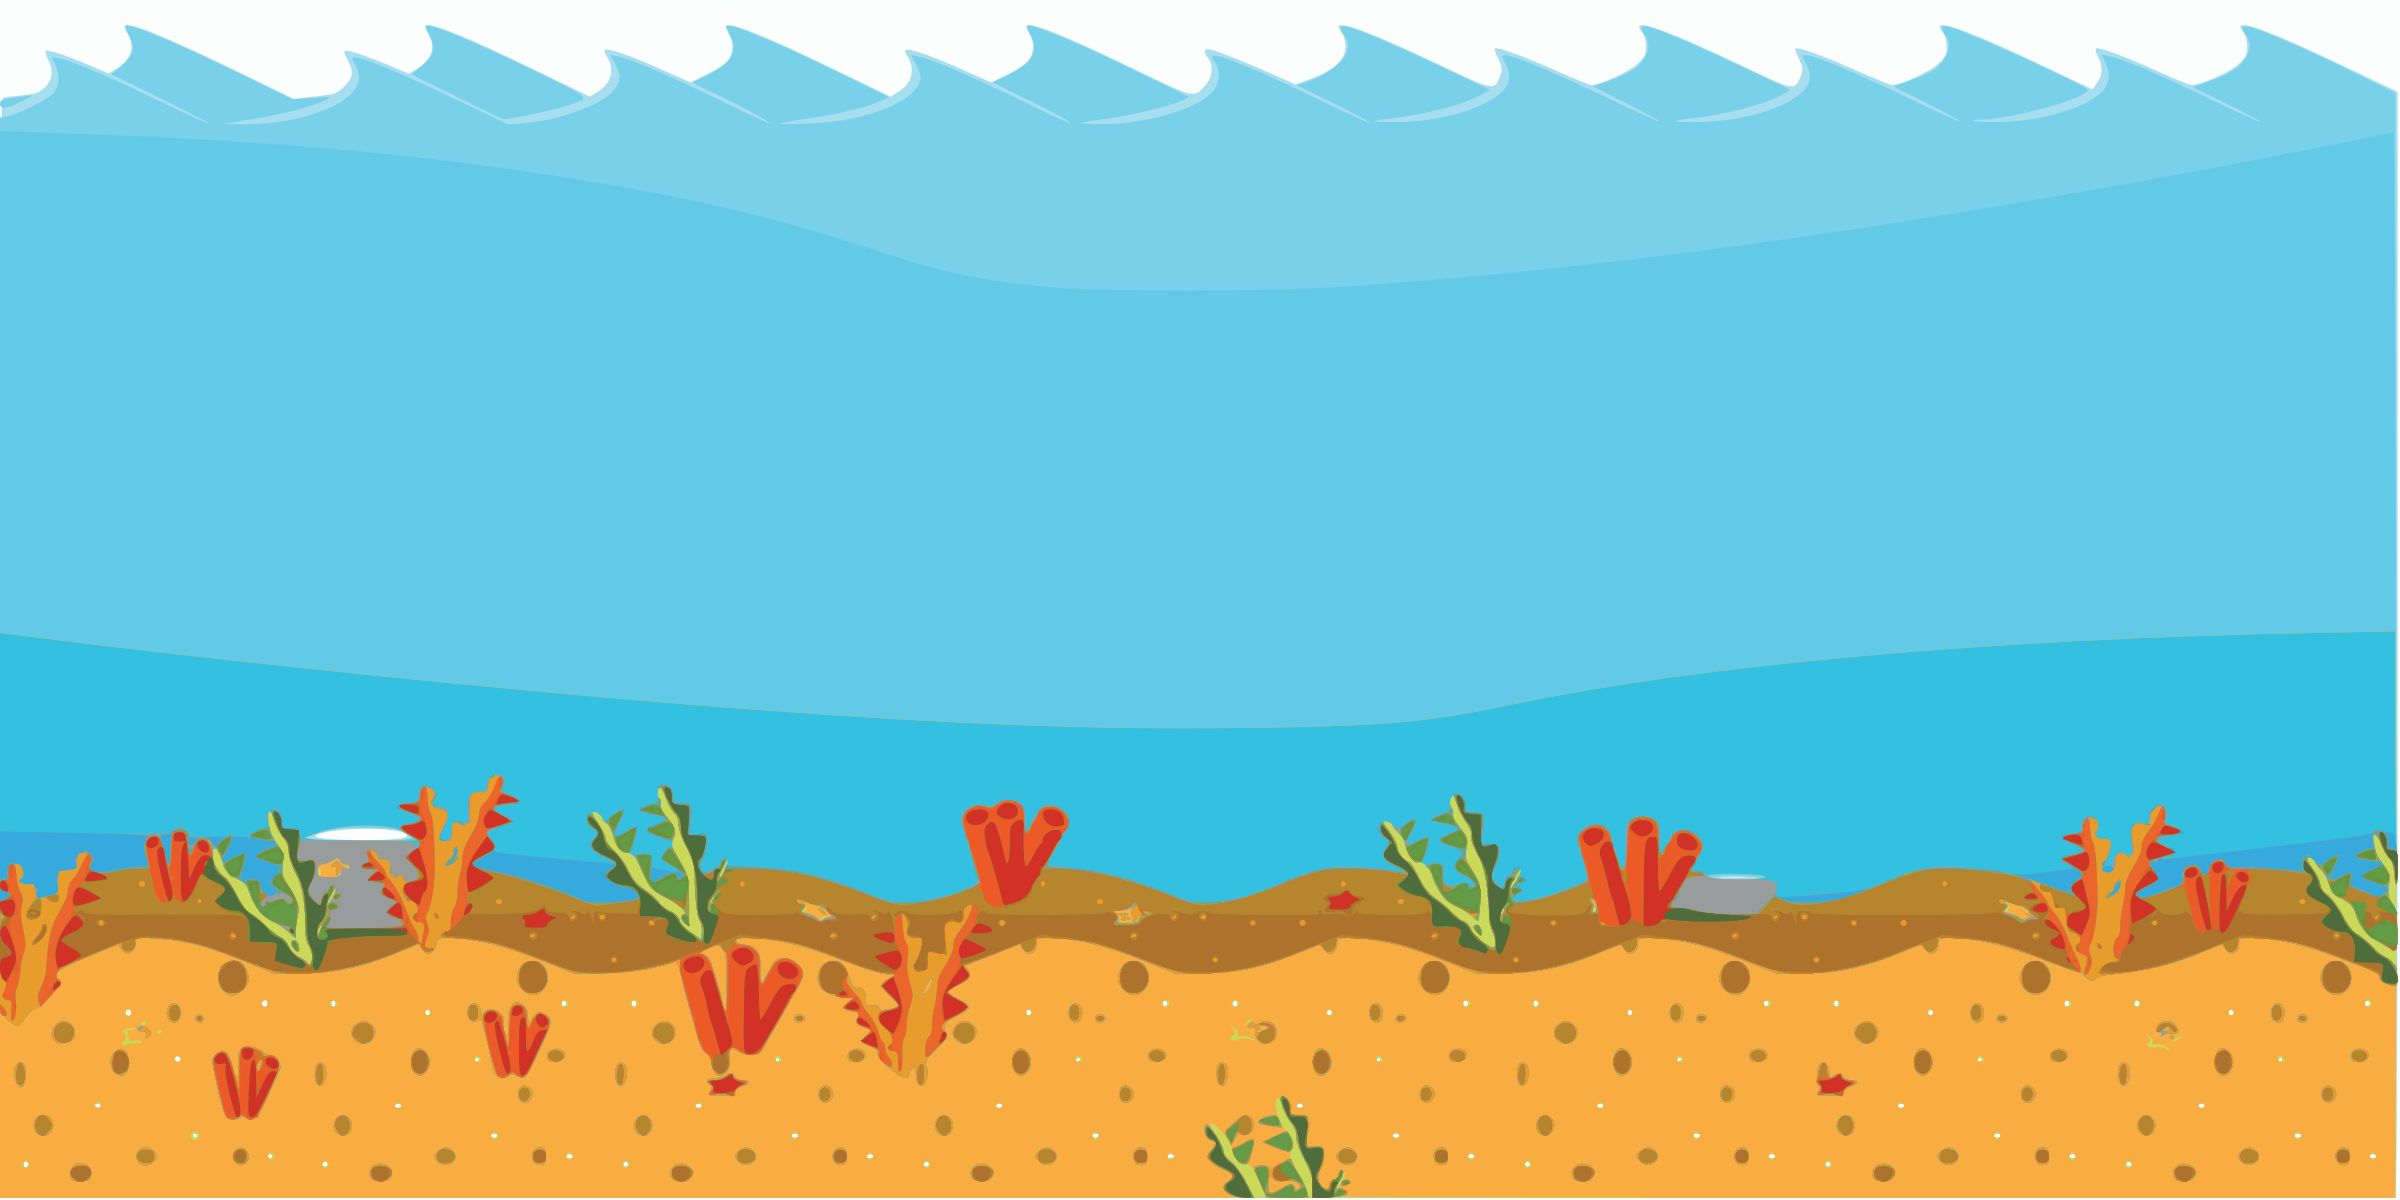 Free Ocean Background Cliparts, Download Free Clip Art, Free